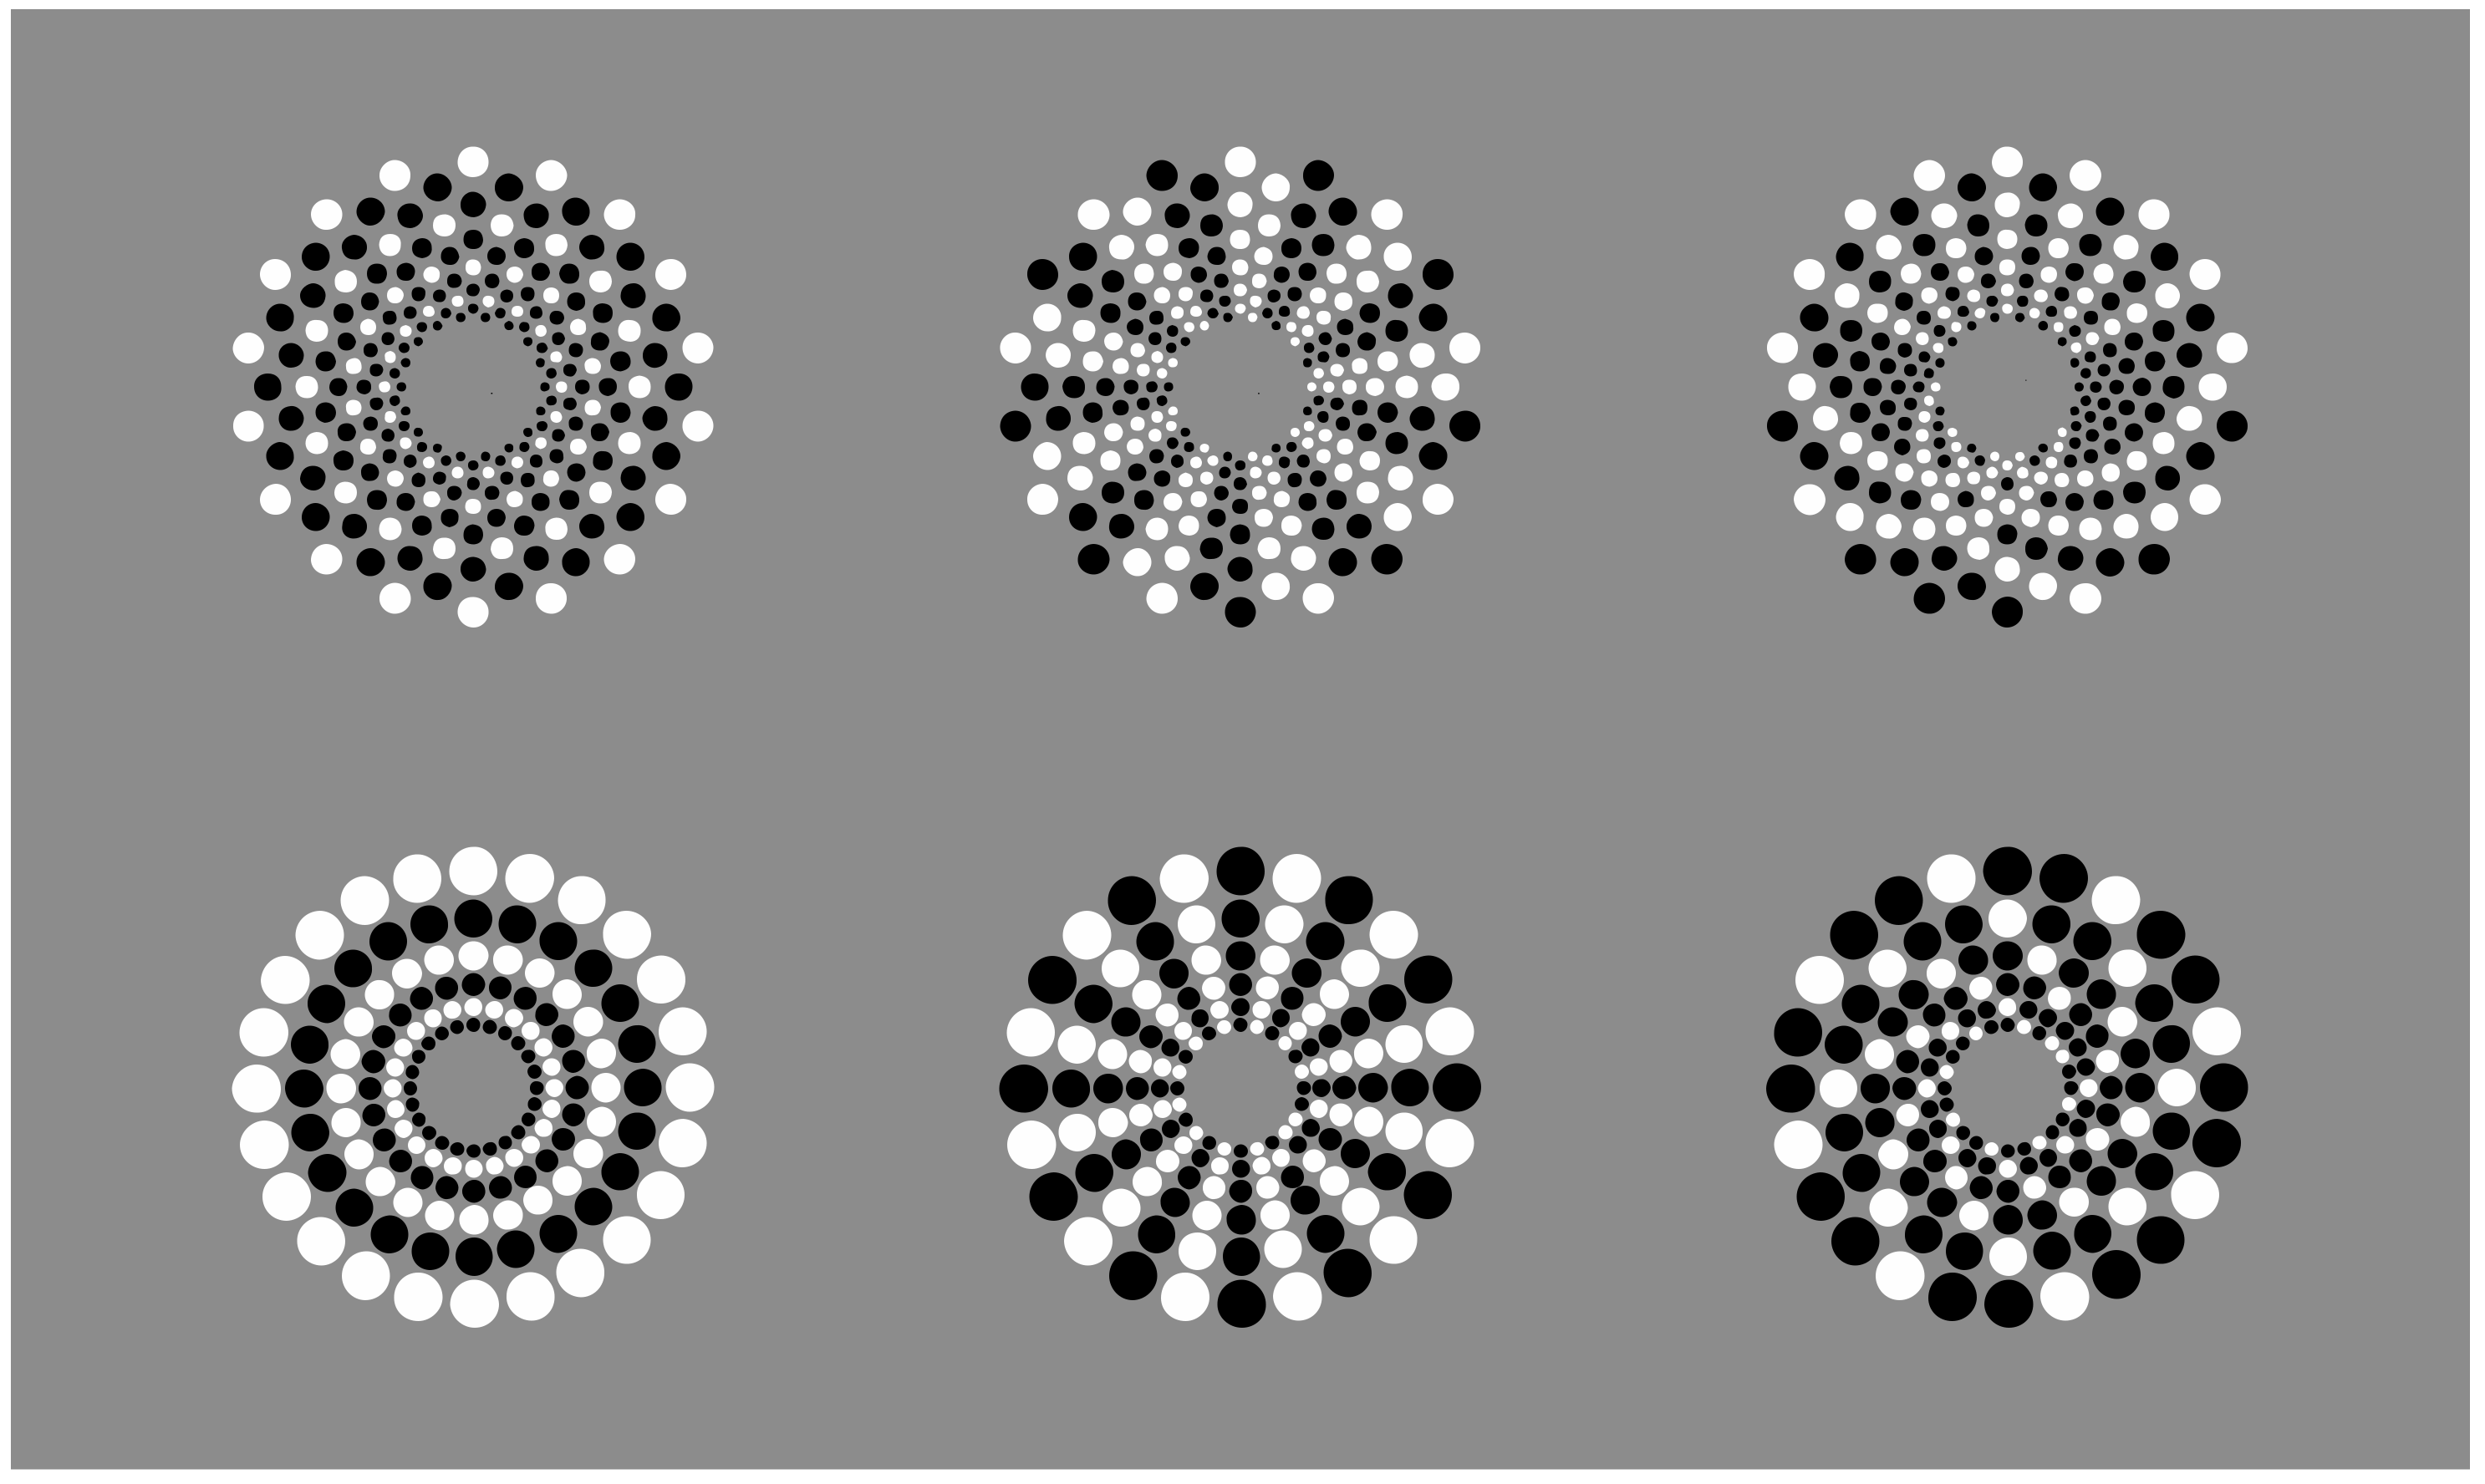 gestalt principles of grouping similarity of orientation